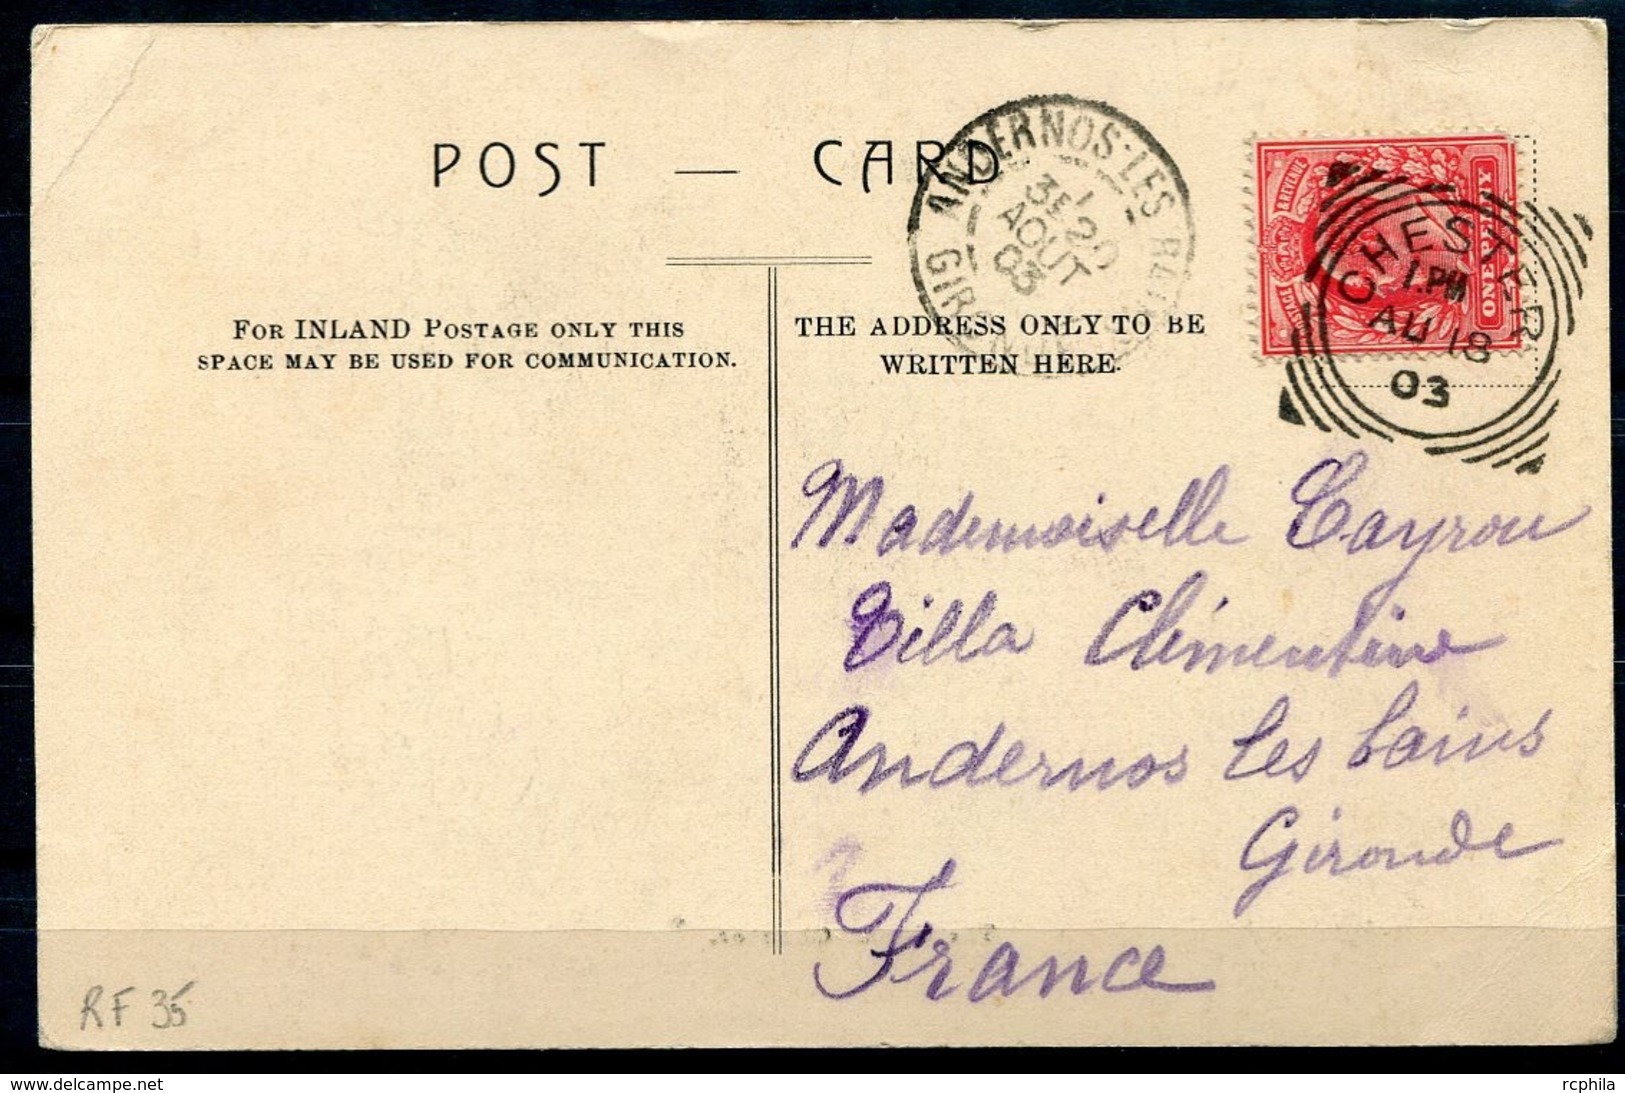 RC 14568 GB SQUARED CIRCLE " CHESTER " AU 18 1903 POSTMARK ON POST CARD VF - Marcophilie